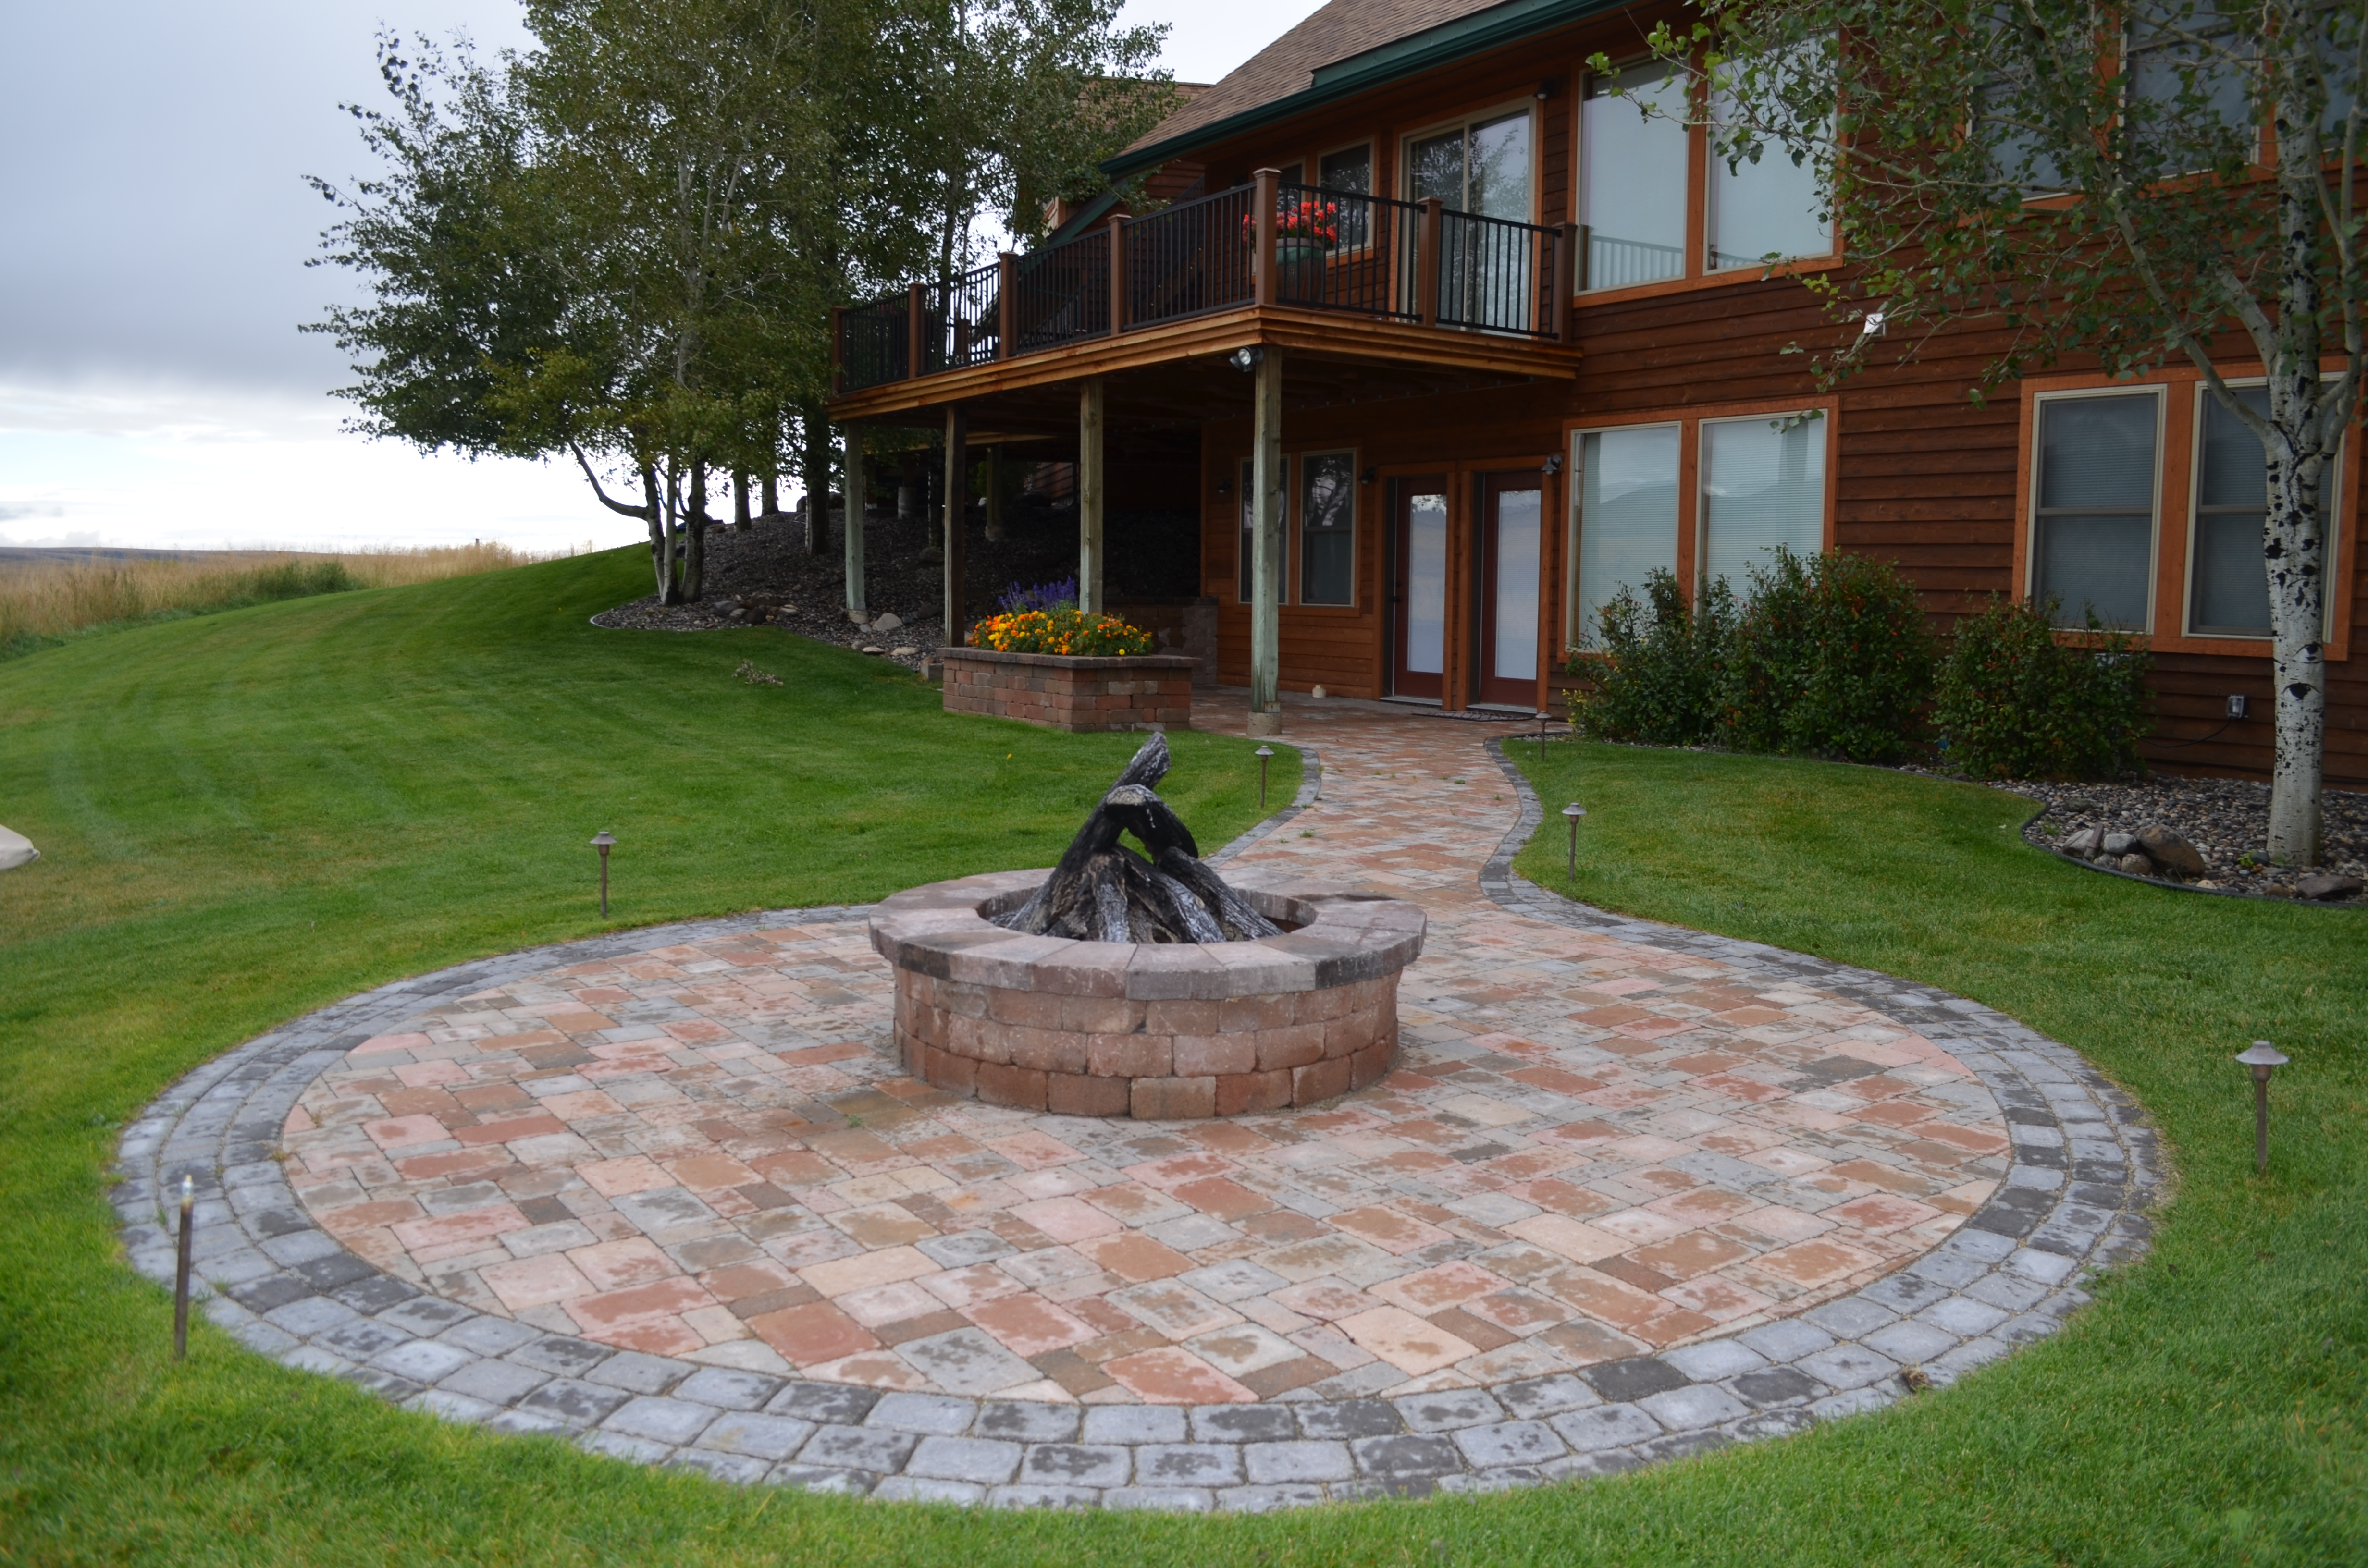 Another view of the spectacular paver patio, walkway, fire pit & landscaping.